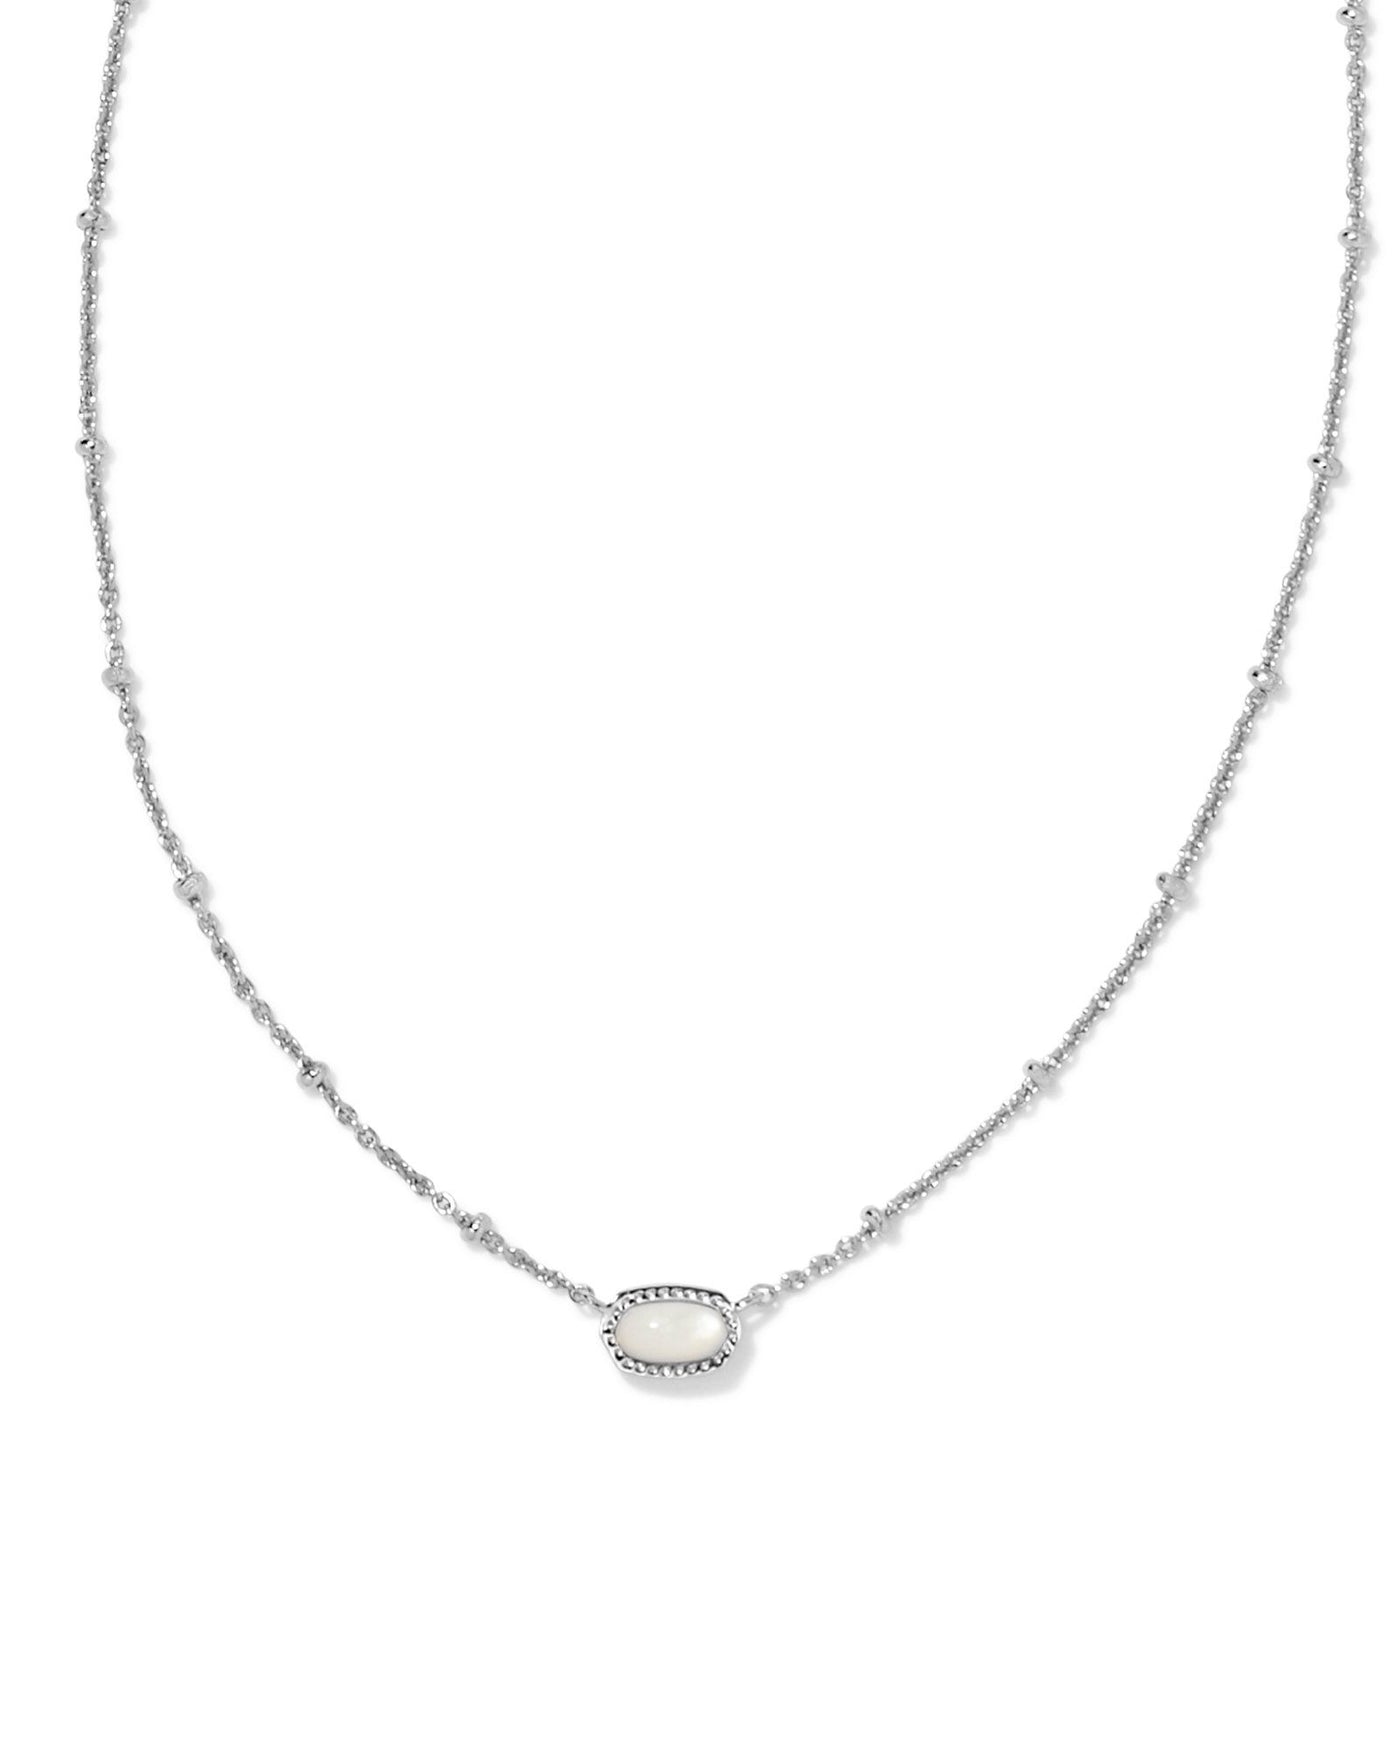 Kendra Scott Mini Elisa Satellite Short Pendant Necklace-Necklaces-Kendra Scott-Market Street Nest, Fashionable Clothing, Shoes and Home Décor Located in Mabank, TX